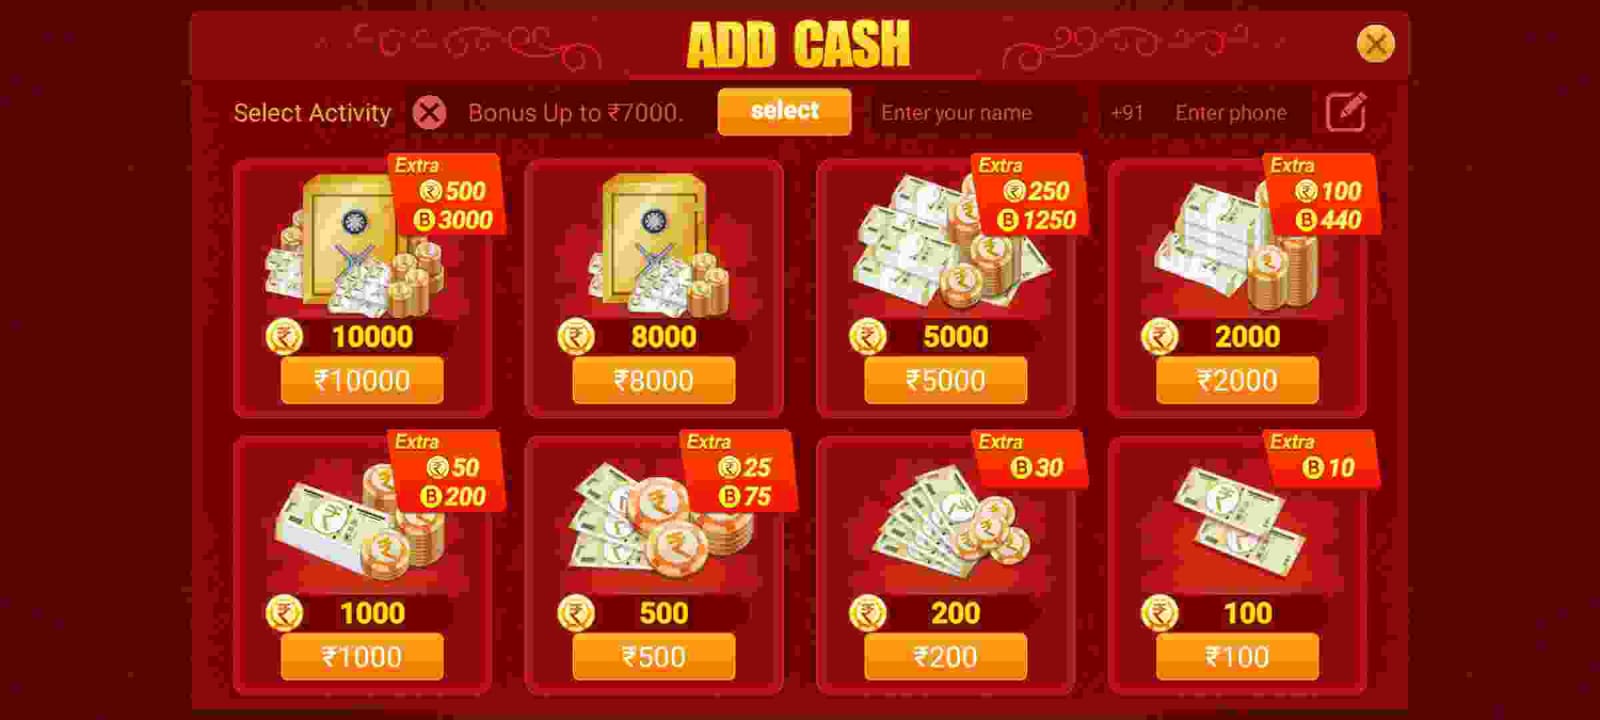 Get 99Rs- Poker Master Casino apk Download & Live Payment Proof